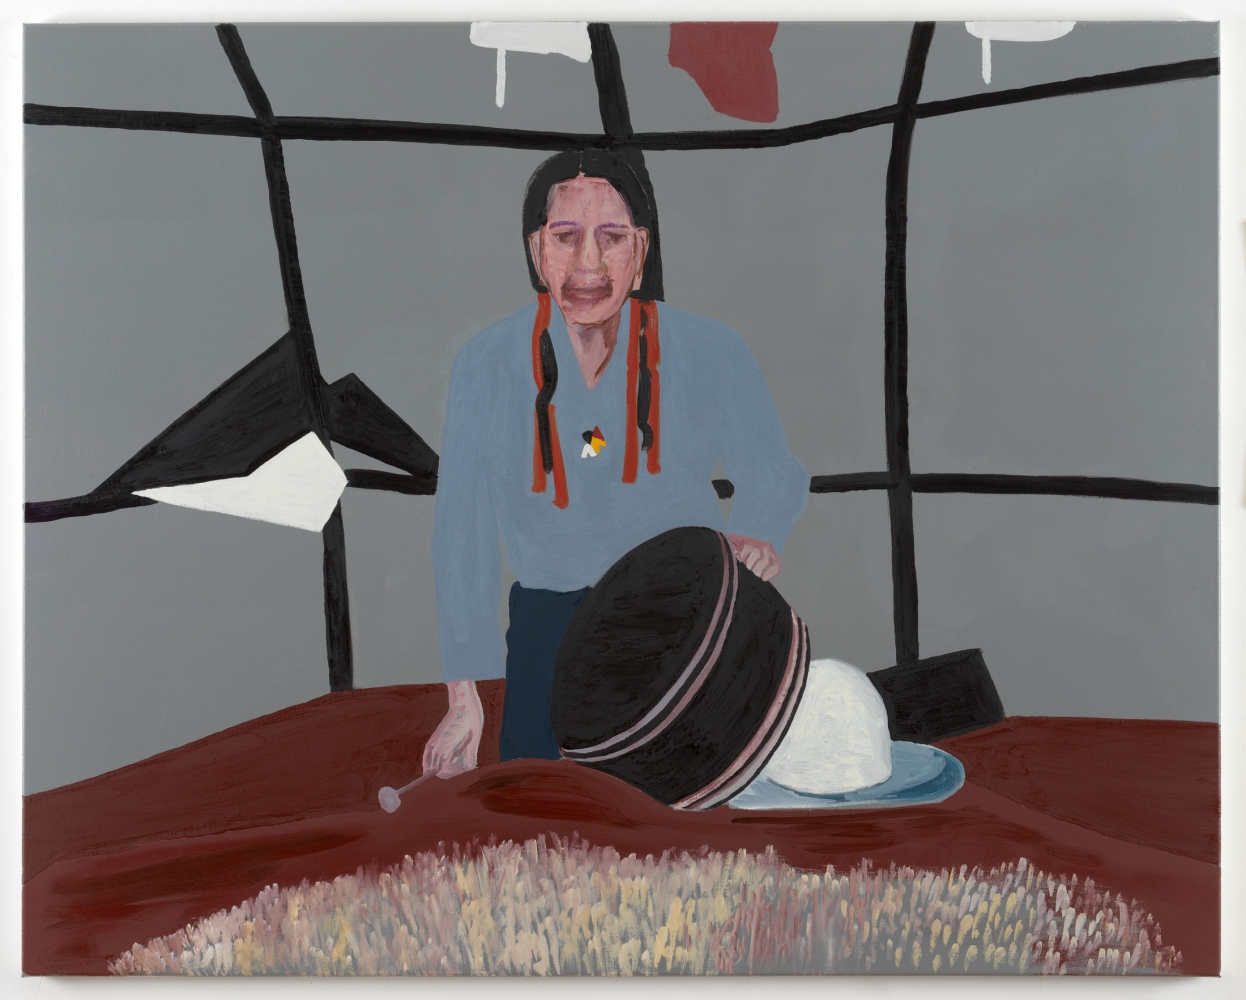 Emo Verkerk
Wallace Black Elk (Sweat Lodge), 2020
Groundcolor and oil on linen
47 1/4 x 59 1/8 inches
(120 x 150 cm)